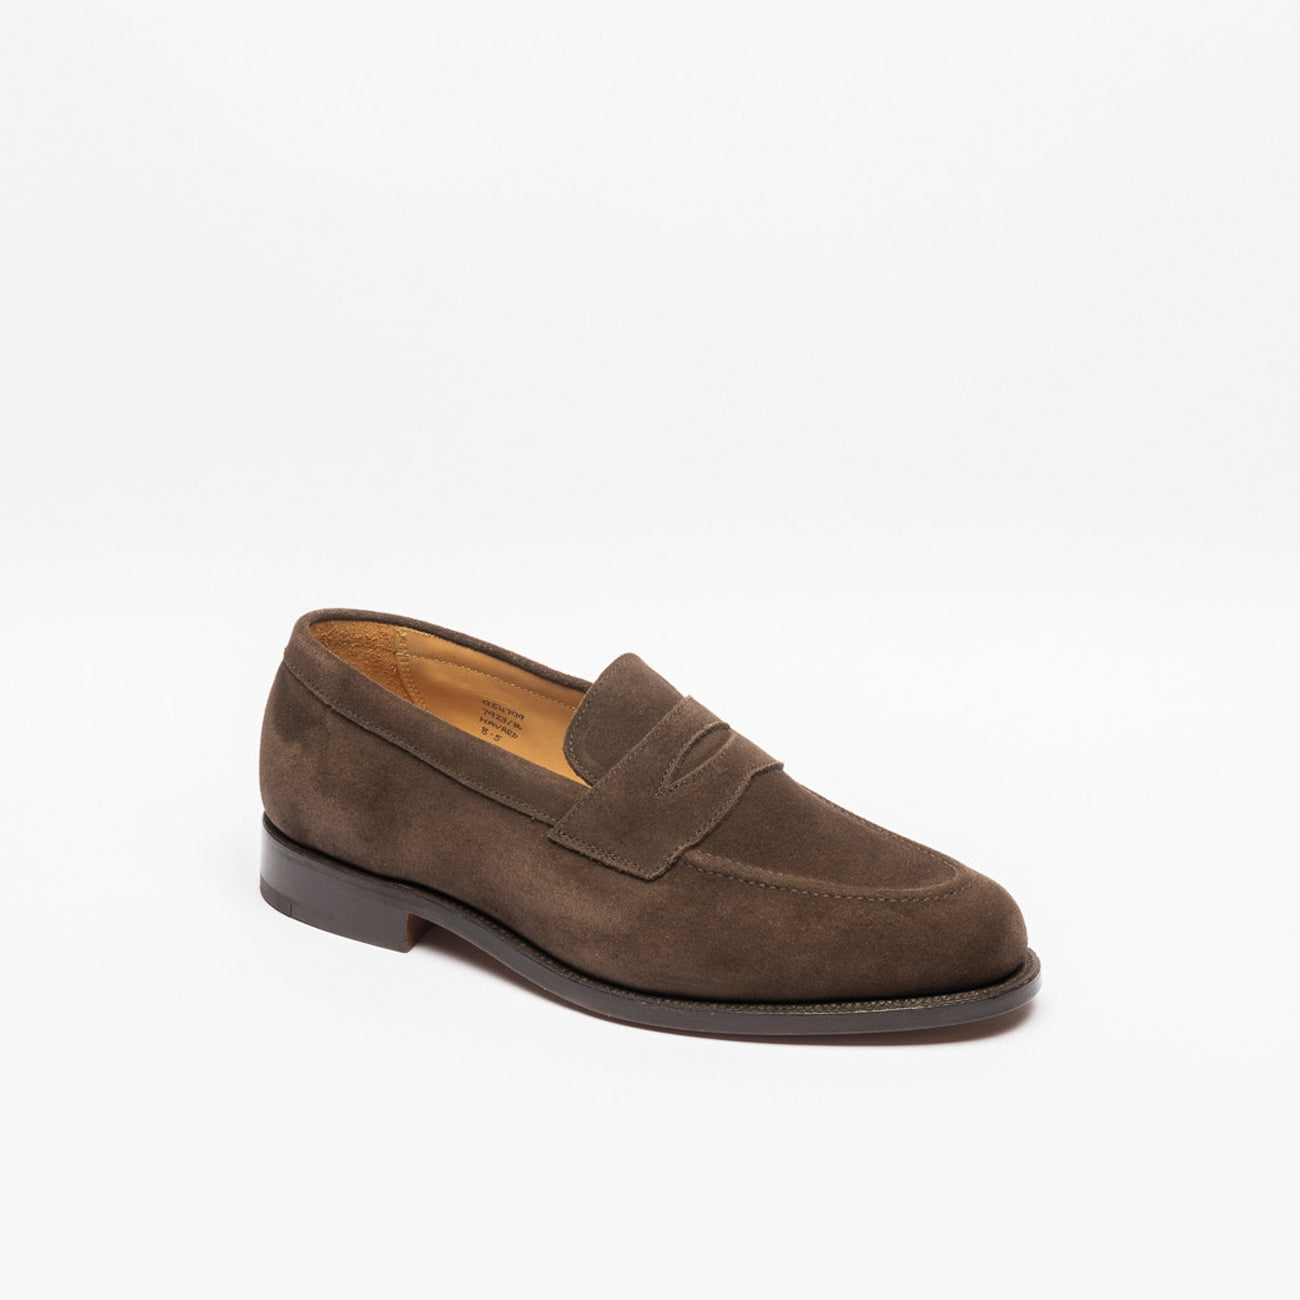 Tricker's brown suede penny loafer